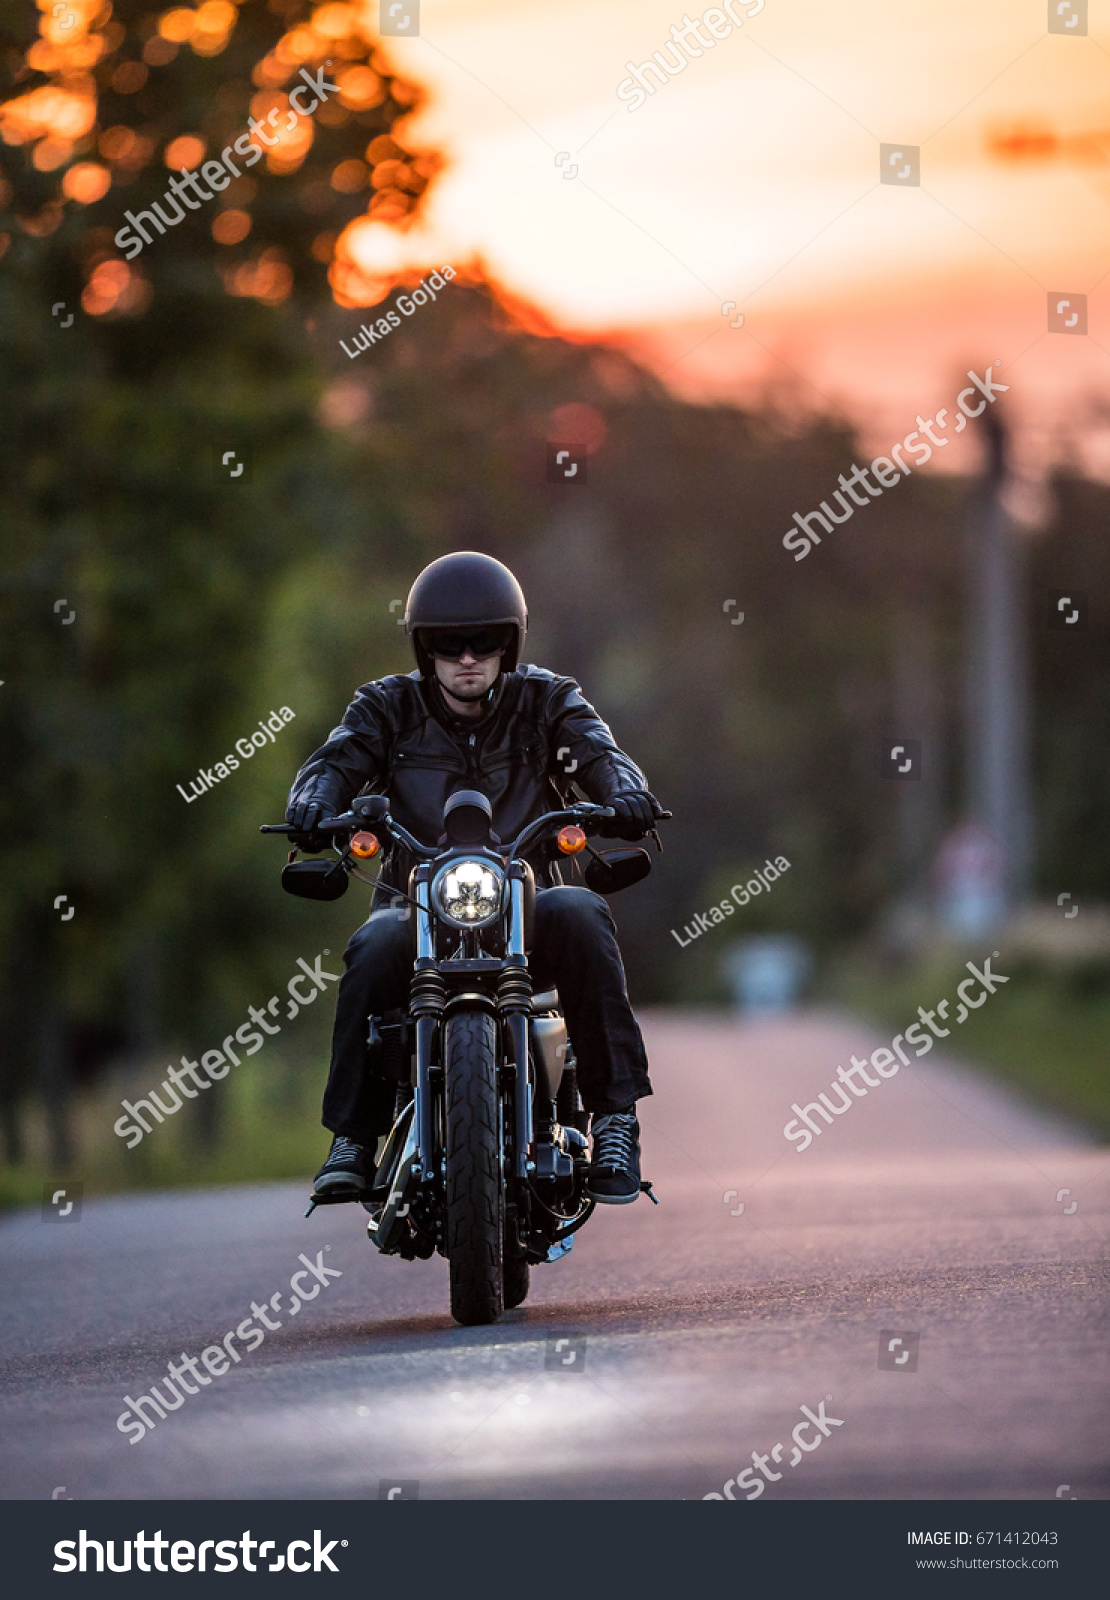 Man riding sportster motorcycle on countryside during sunset. #671412043